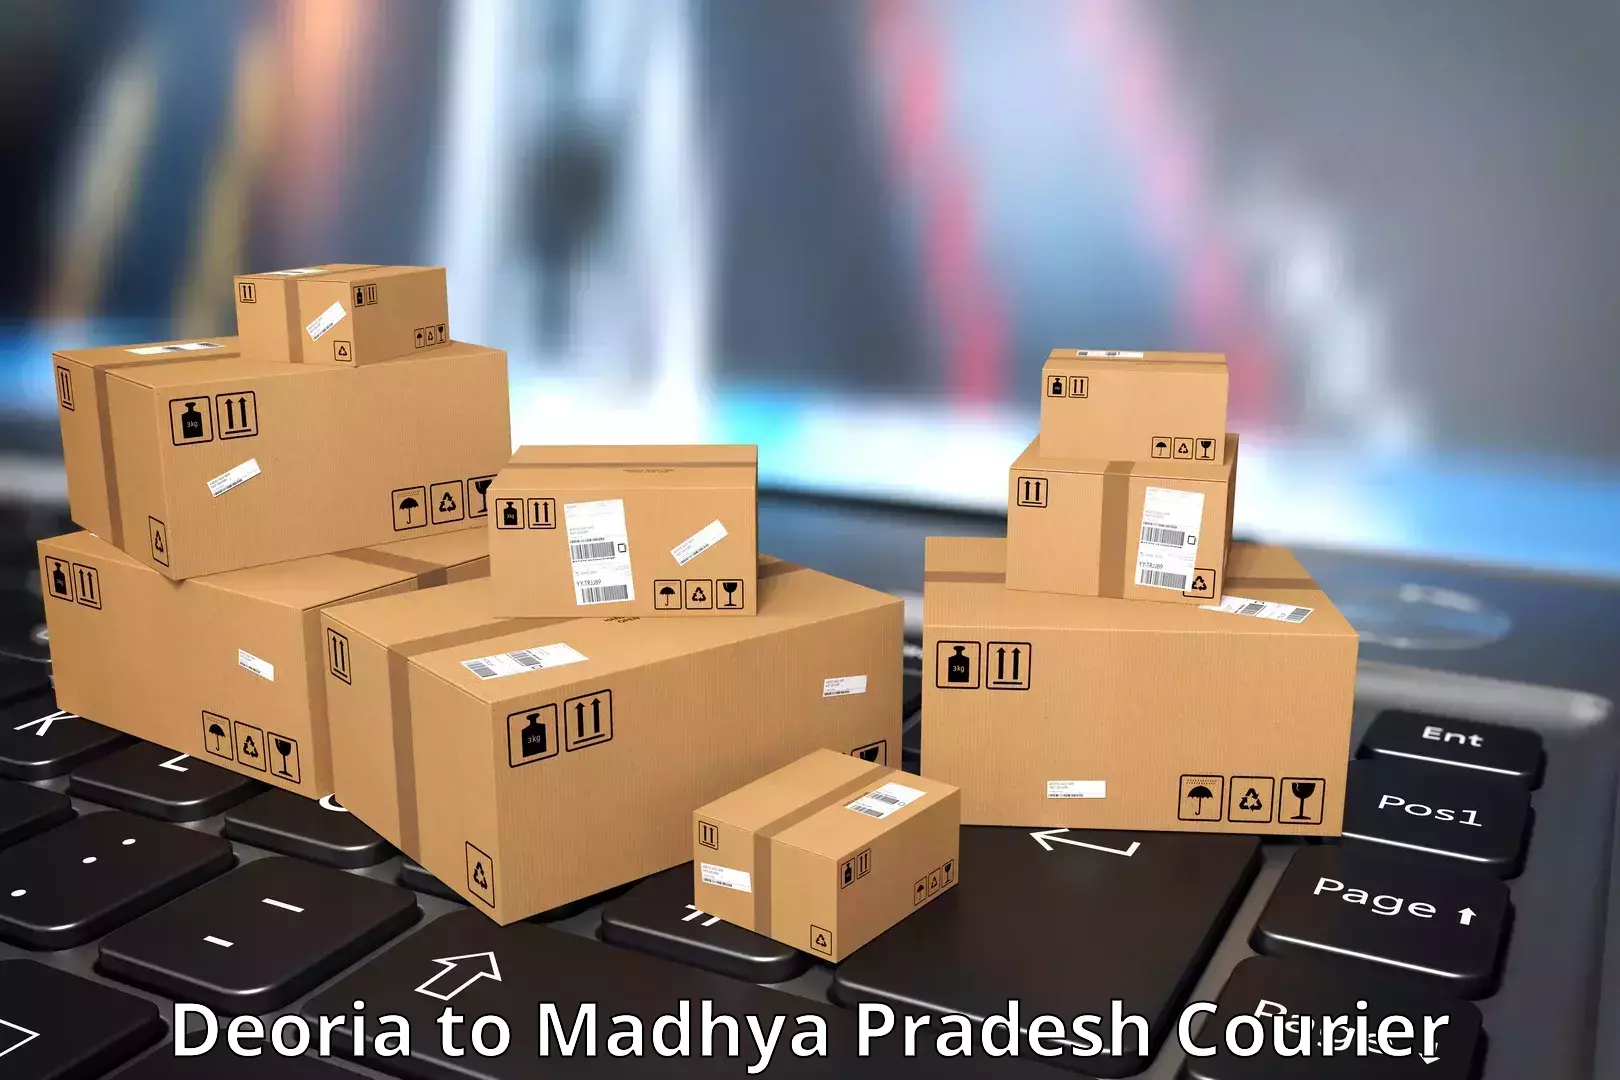 Express delivery capabilities Deoria to Sausar